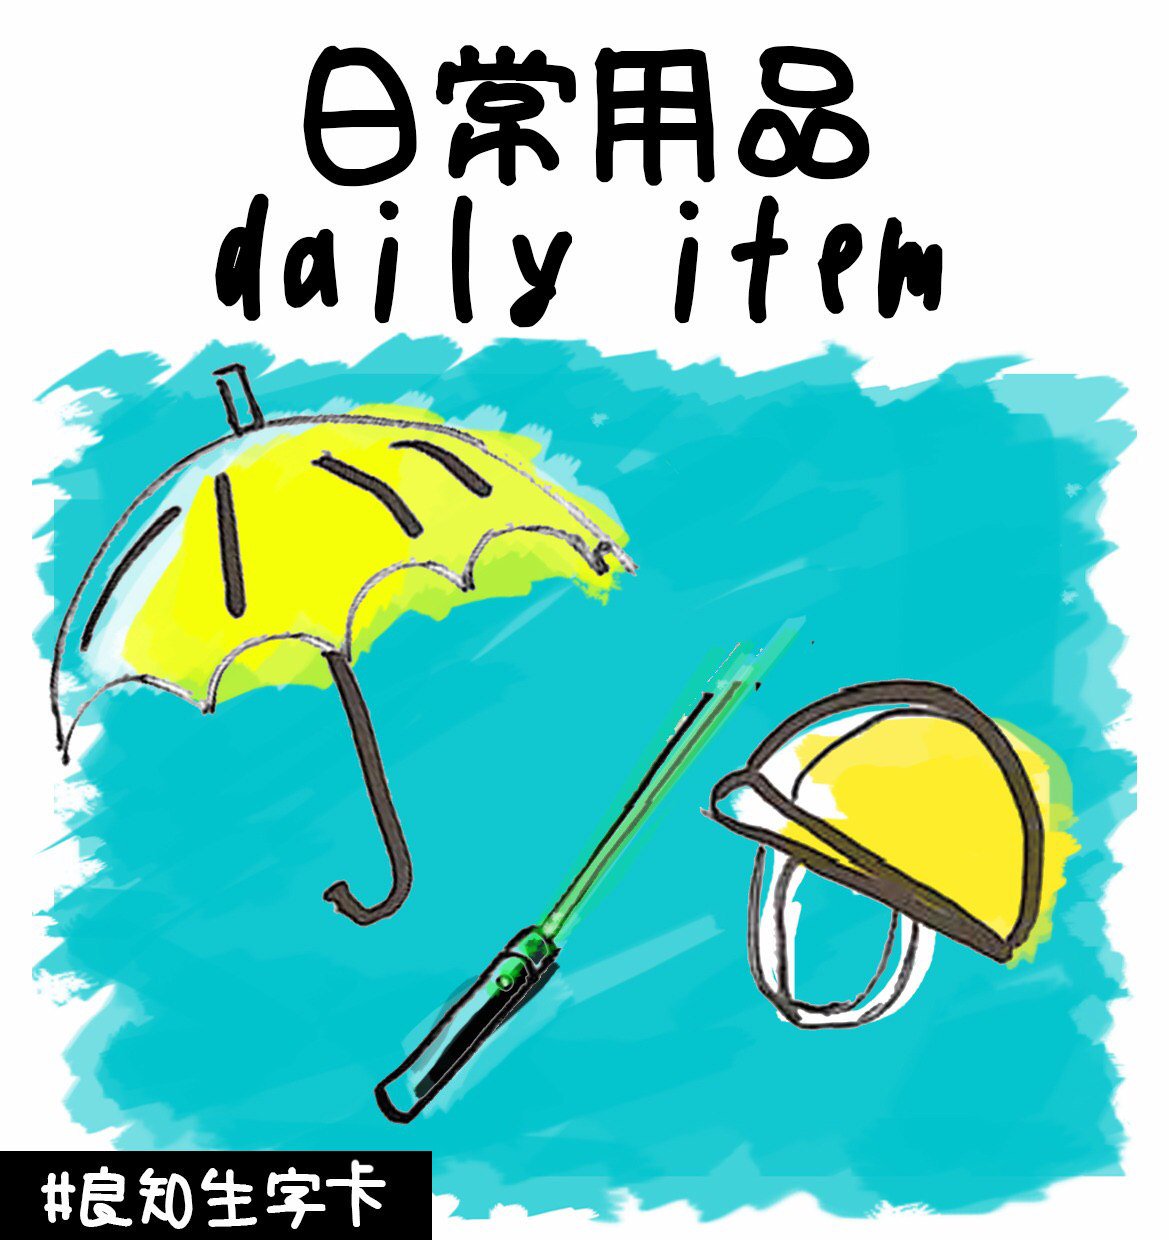 A colourful illustration of an umbrella, green laser pointer, and hard hat. It is captioned in English and Chinese as "daily item". A hashtag in the corner, in Chinese, reads: #Conscience flash cards.